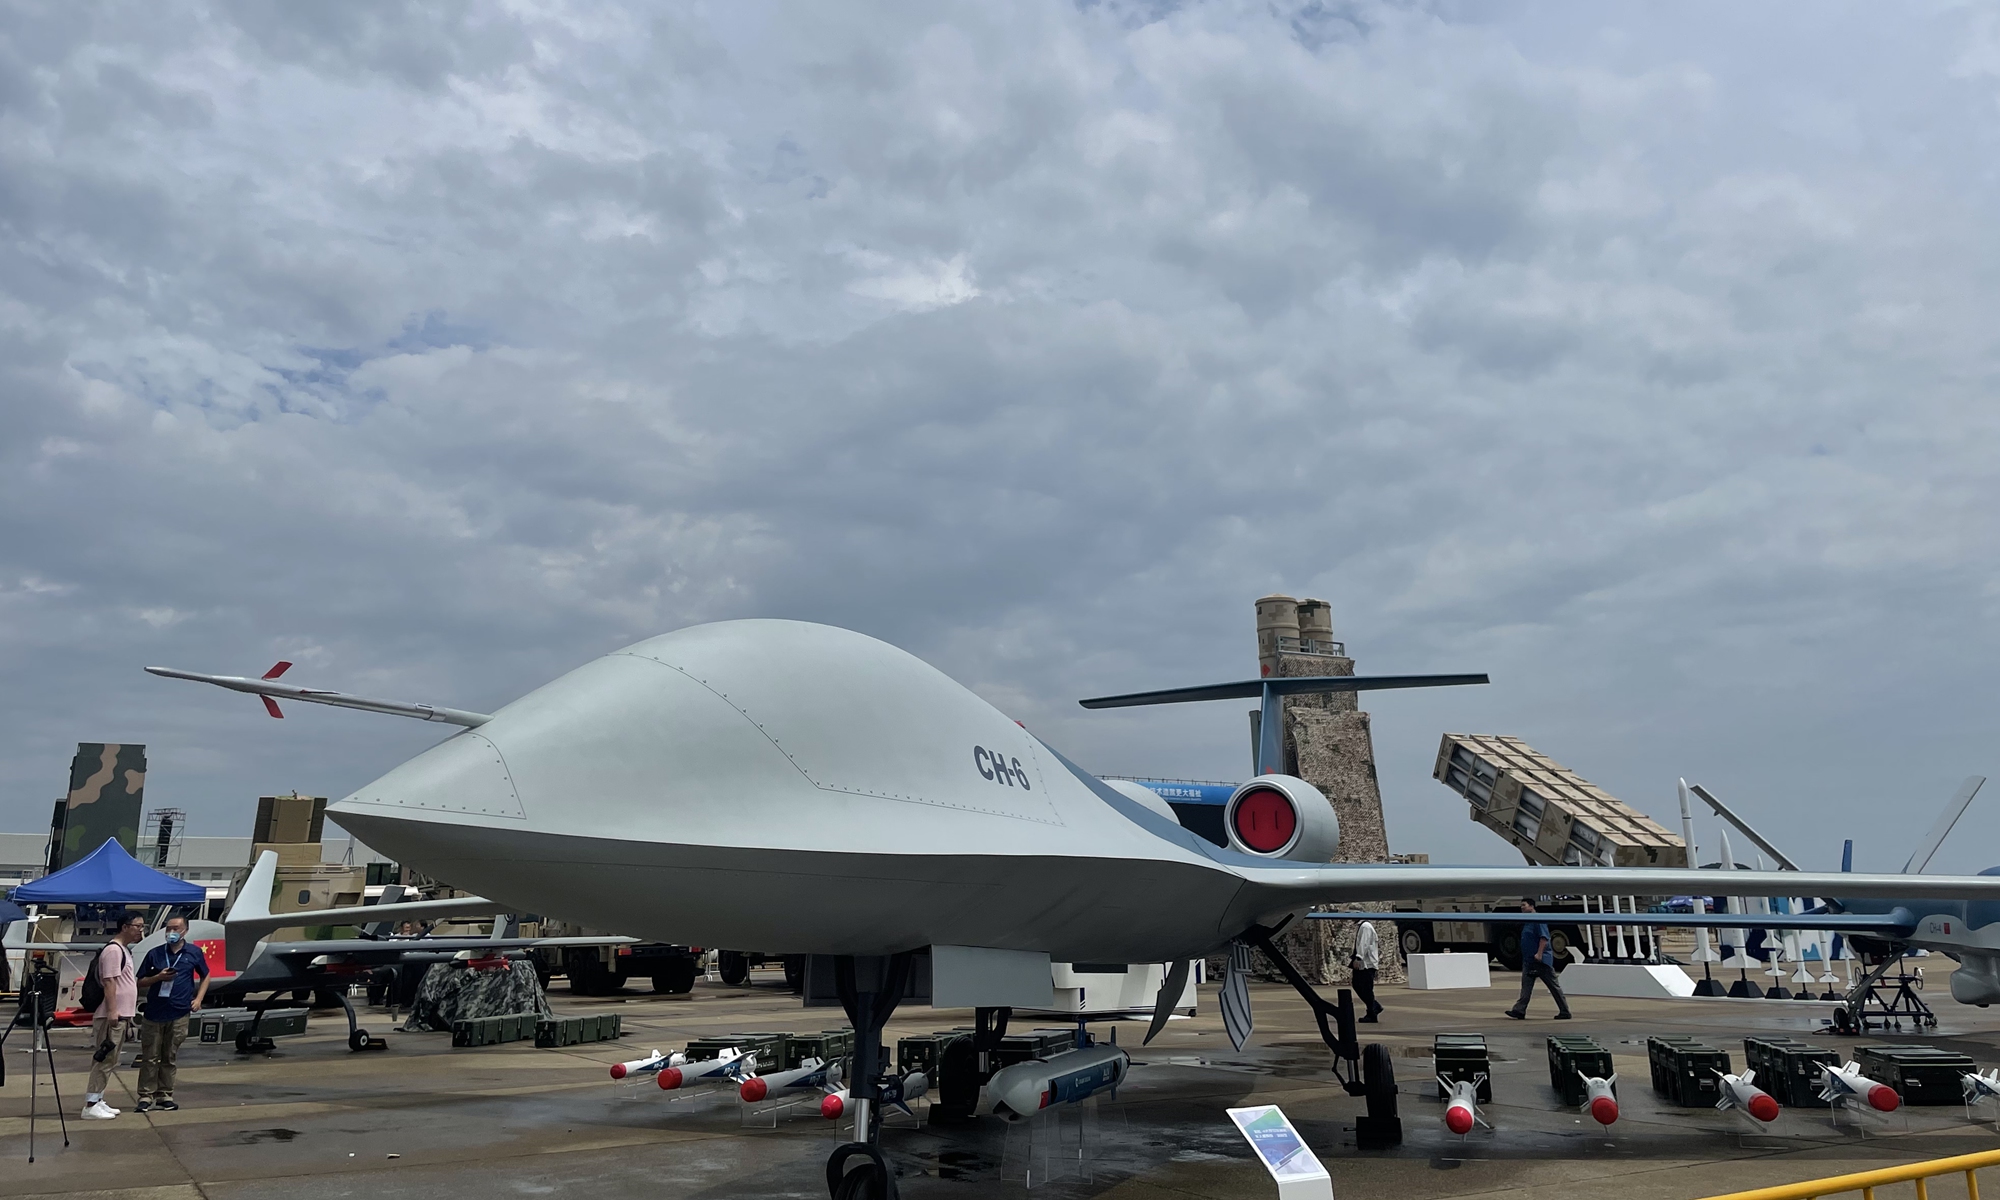 The CH UAV company displays the CH-6 drone for the first time at Airshow China 2021 in Zhuhai, South China's Guangdong Province in September. Photo: Lin Luwen/GT